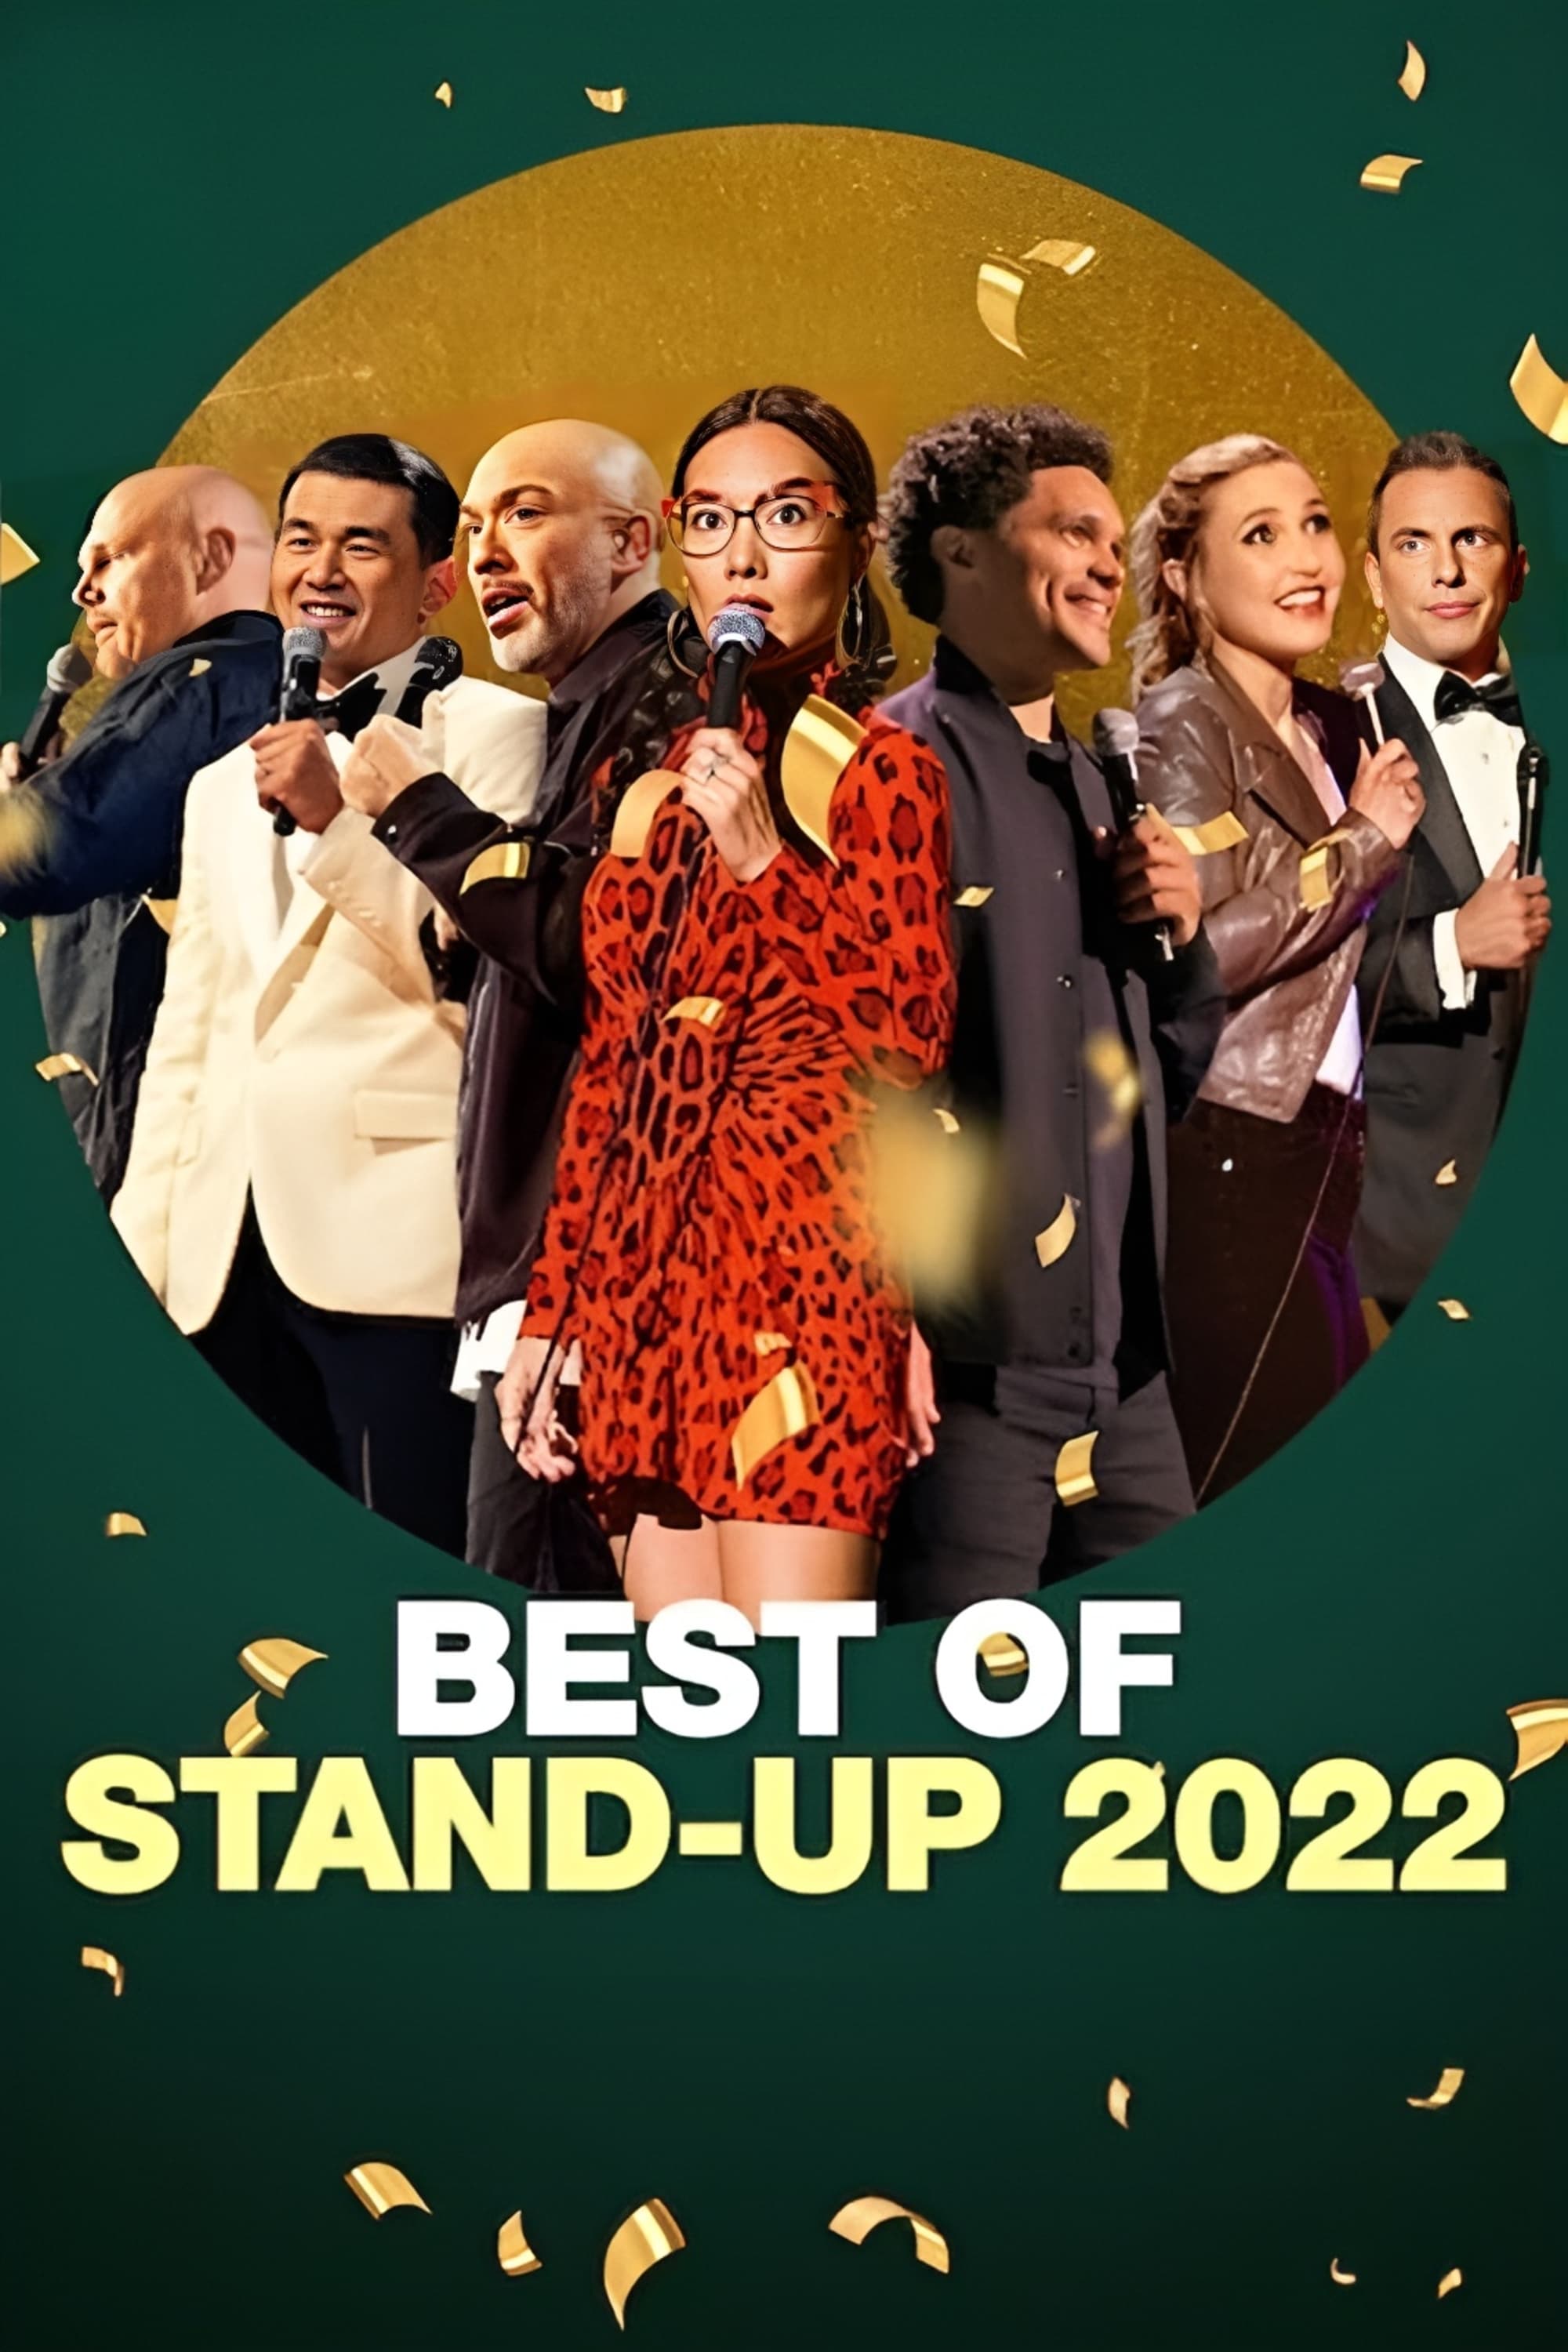 Best of Stand-Up 2022 film